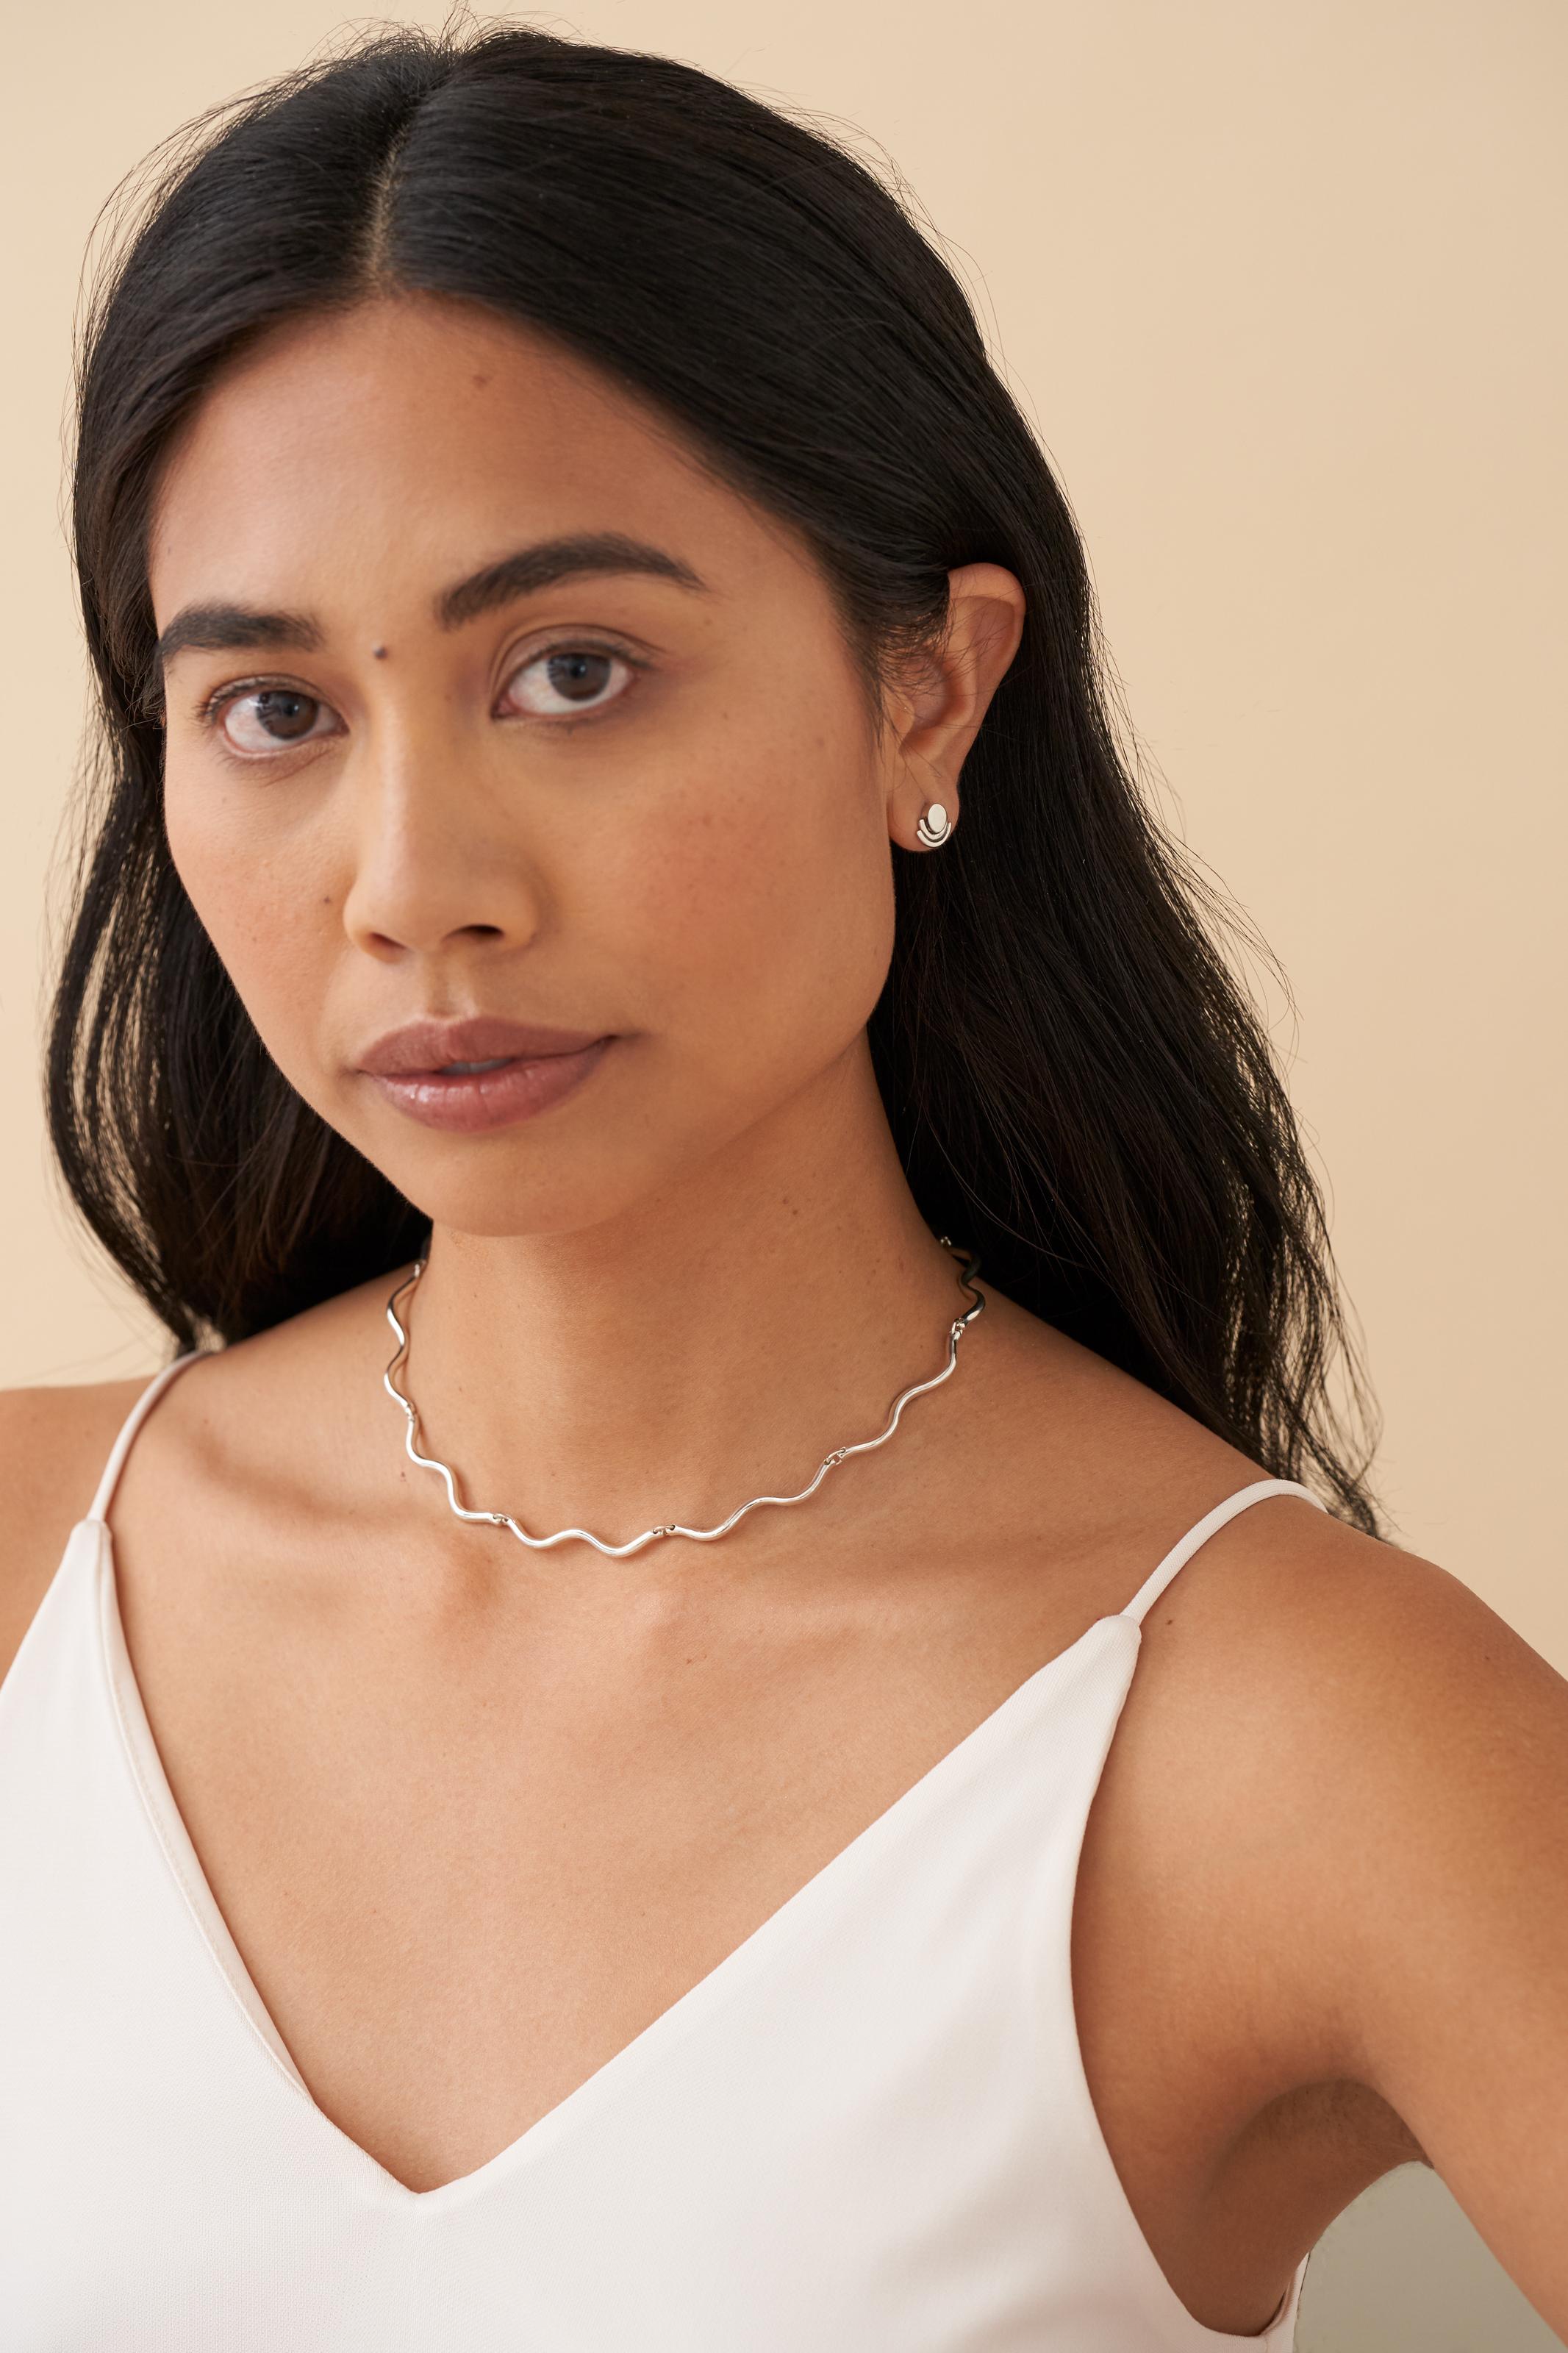 Inspired by the works of visionary designers Verner Panton and Jean Royere, our Verner Necklace is a playful and elegant interpretation of line and form. With a wavy link design, this necklace is a sophisticated statement piece perfect for adding a